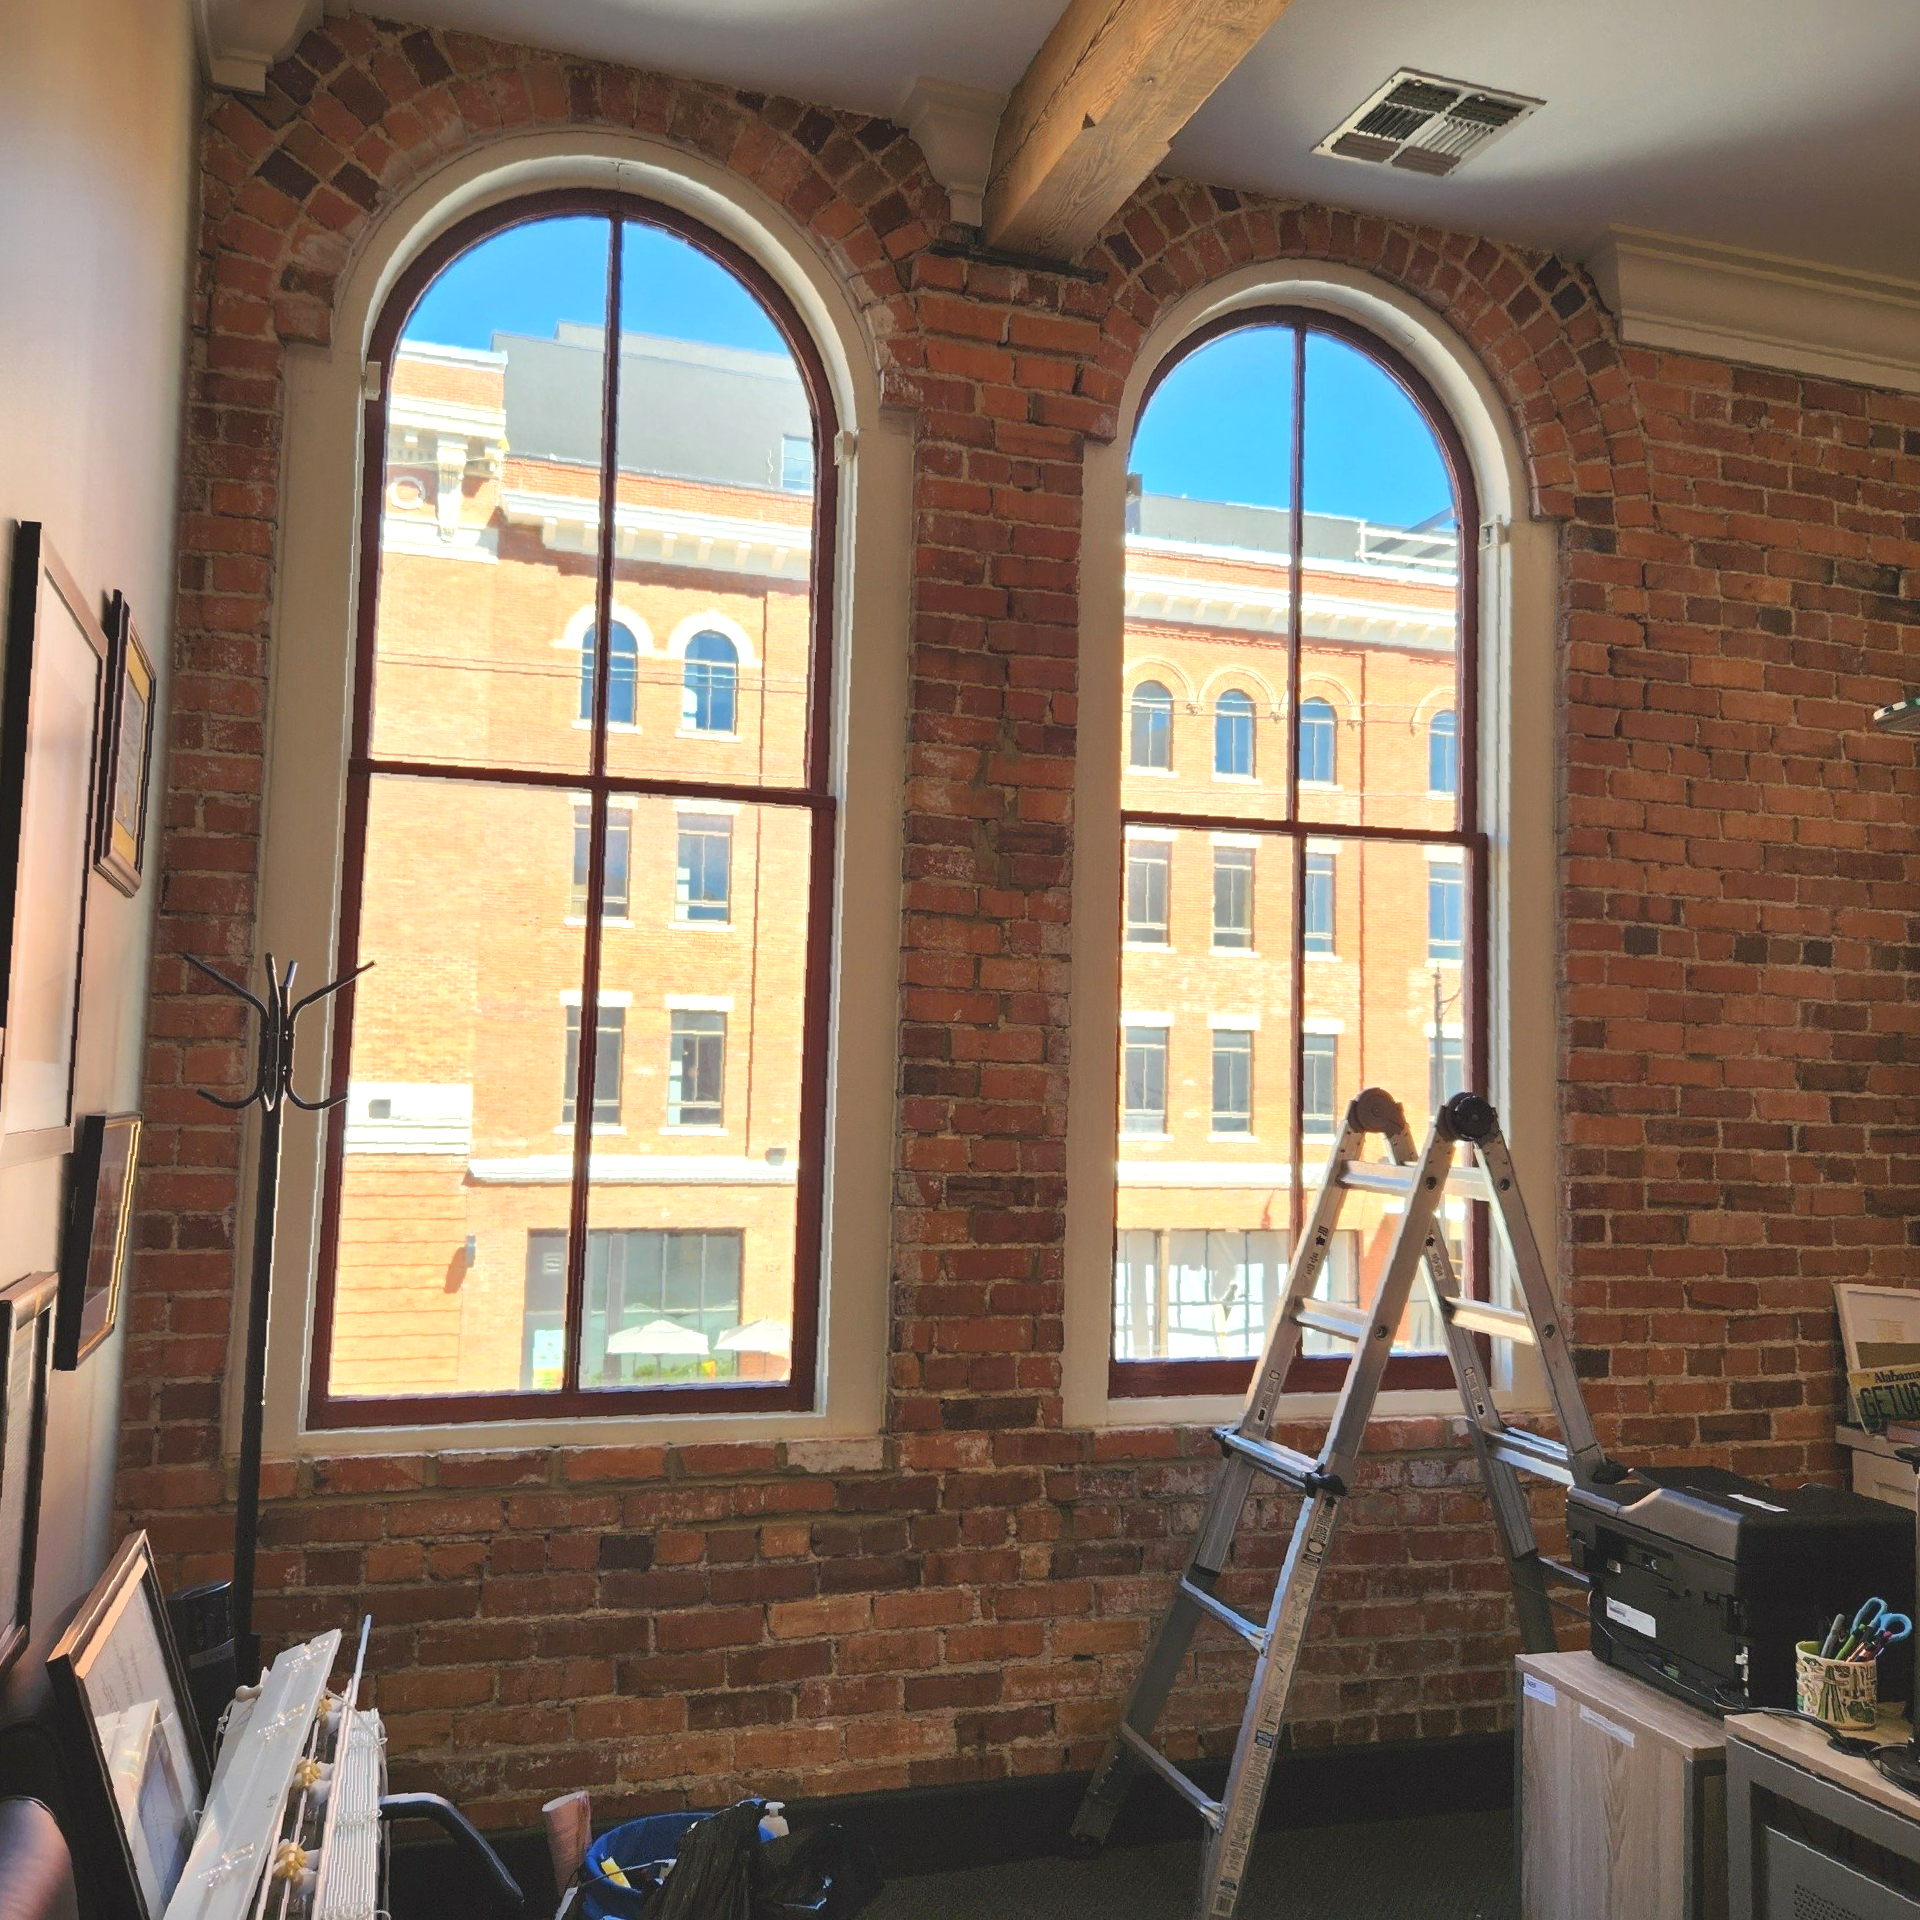 Window renewal credit - Bright Glare & Sun Fade were causing office disruptions before SPF Tint renews windows with efficiency in AL